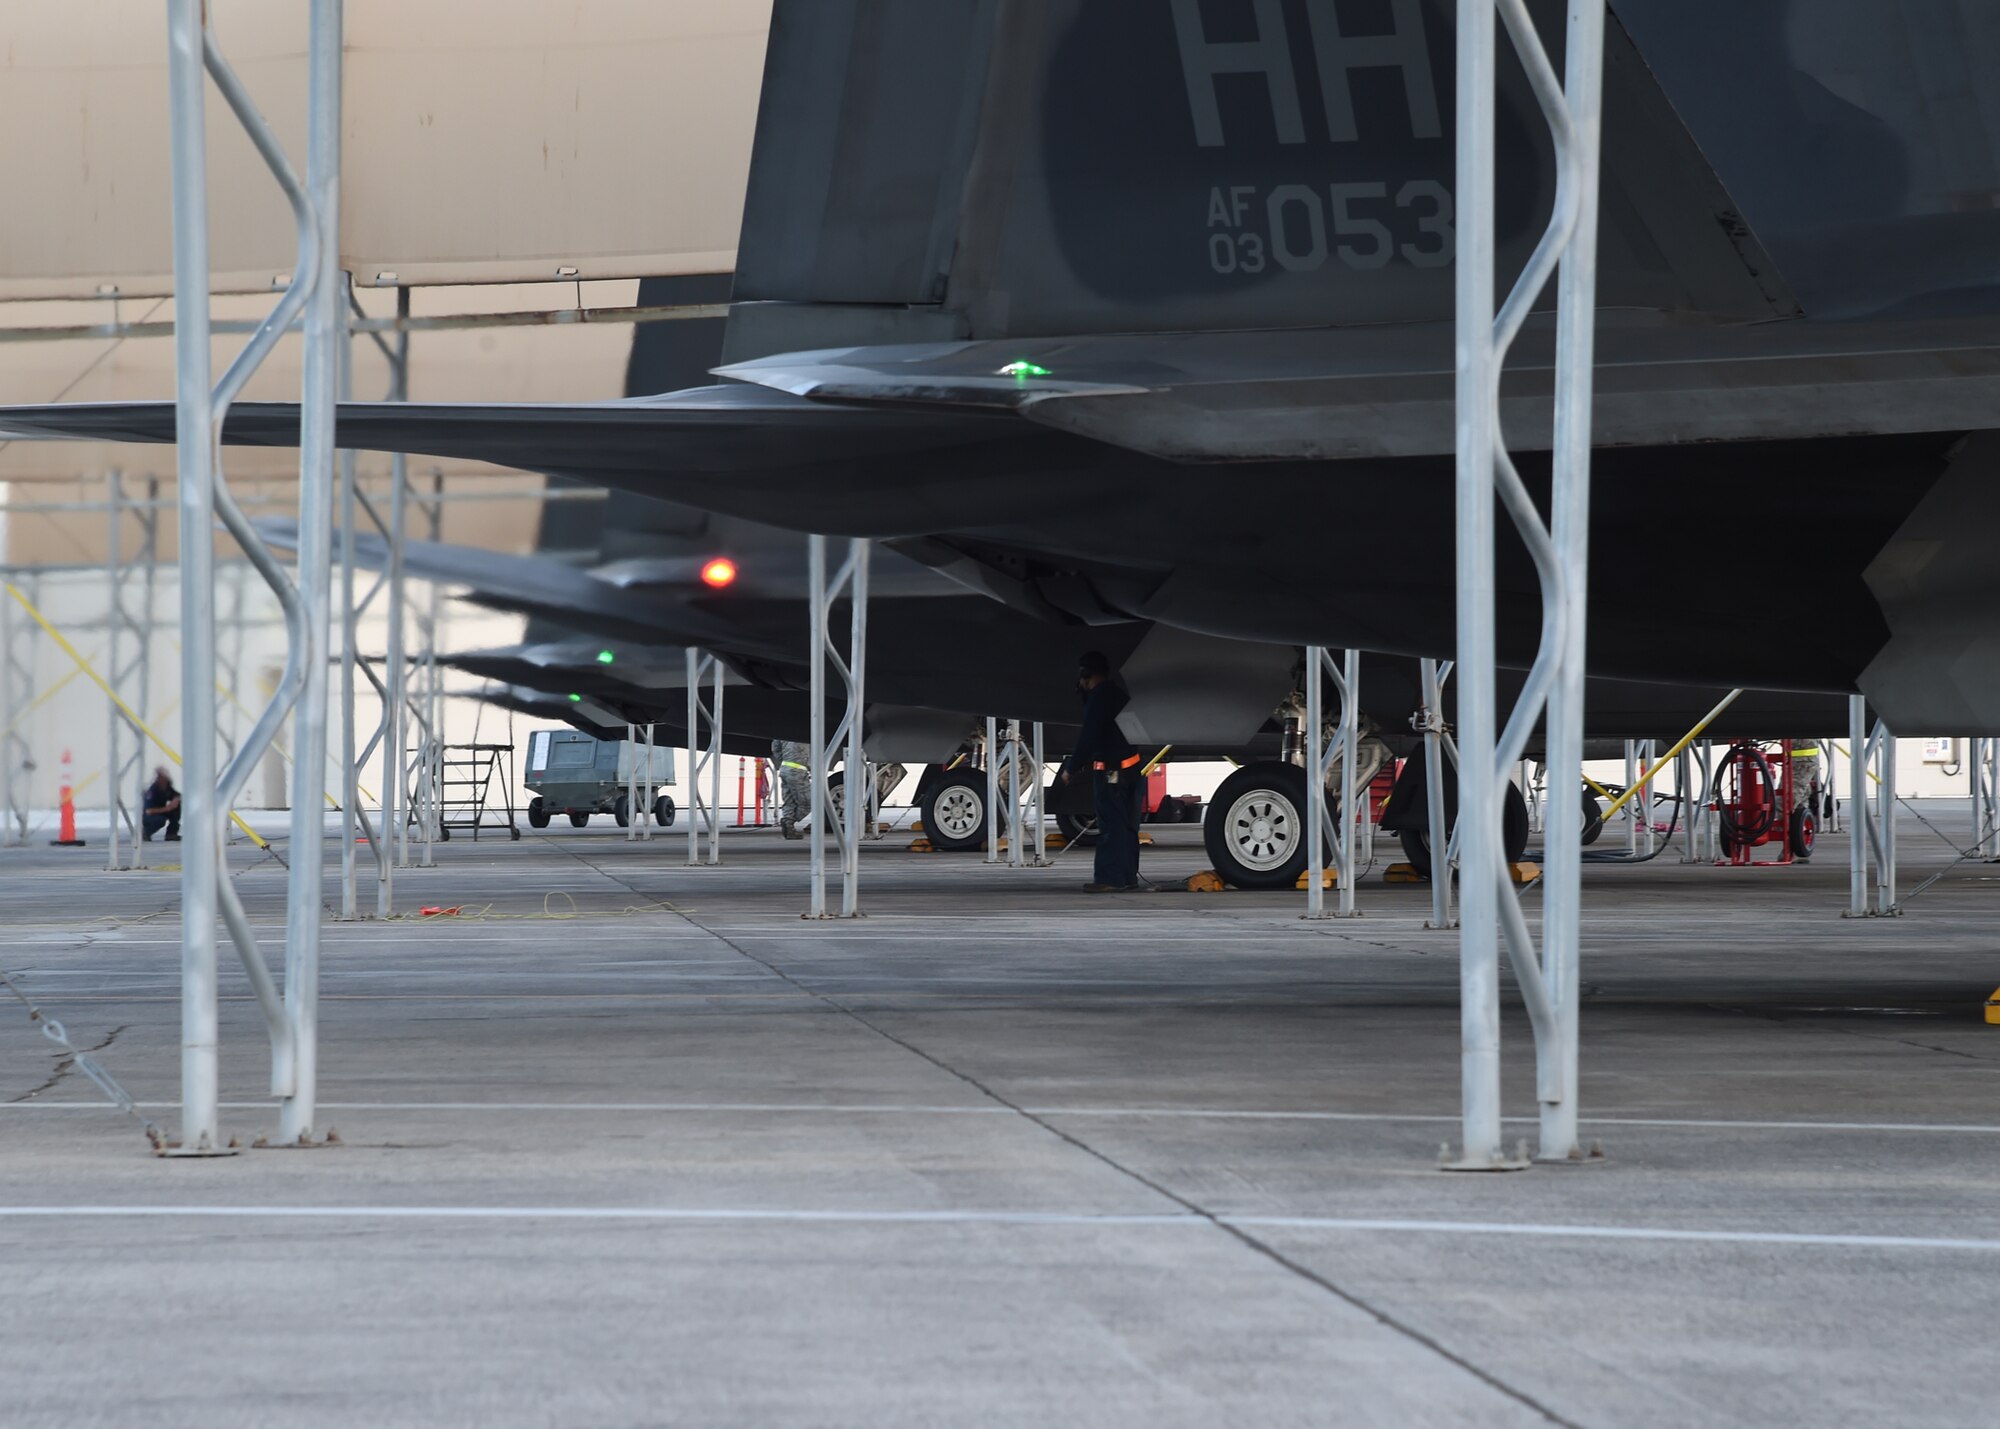 F-22 Raptors from the 199th Fighter Squadron prepare to launch for a sortie surge from Joint Base Pearl Harbor-Hickam, Hawaii, June 6, 2015. A record breaking 62 Raptor sorties were successfully launched from the runway at JBPHH.  A sortie surge, or an increase in flying operations, simulates wartime operations, which is higher than the standard training tempo. (U.S. Air Force photo by Tech. Sgt. Aaron Oelrich/Released)     